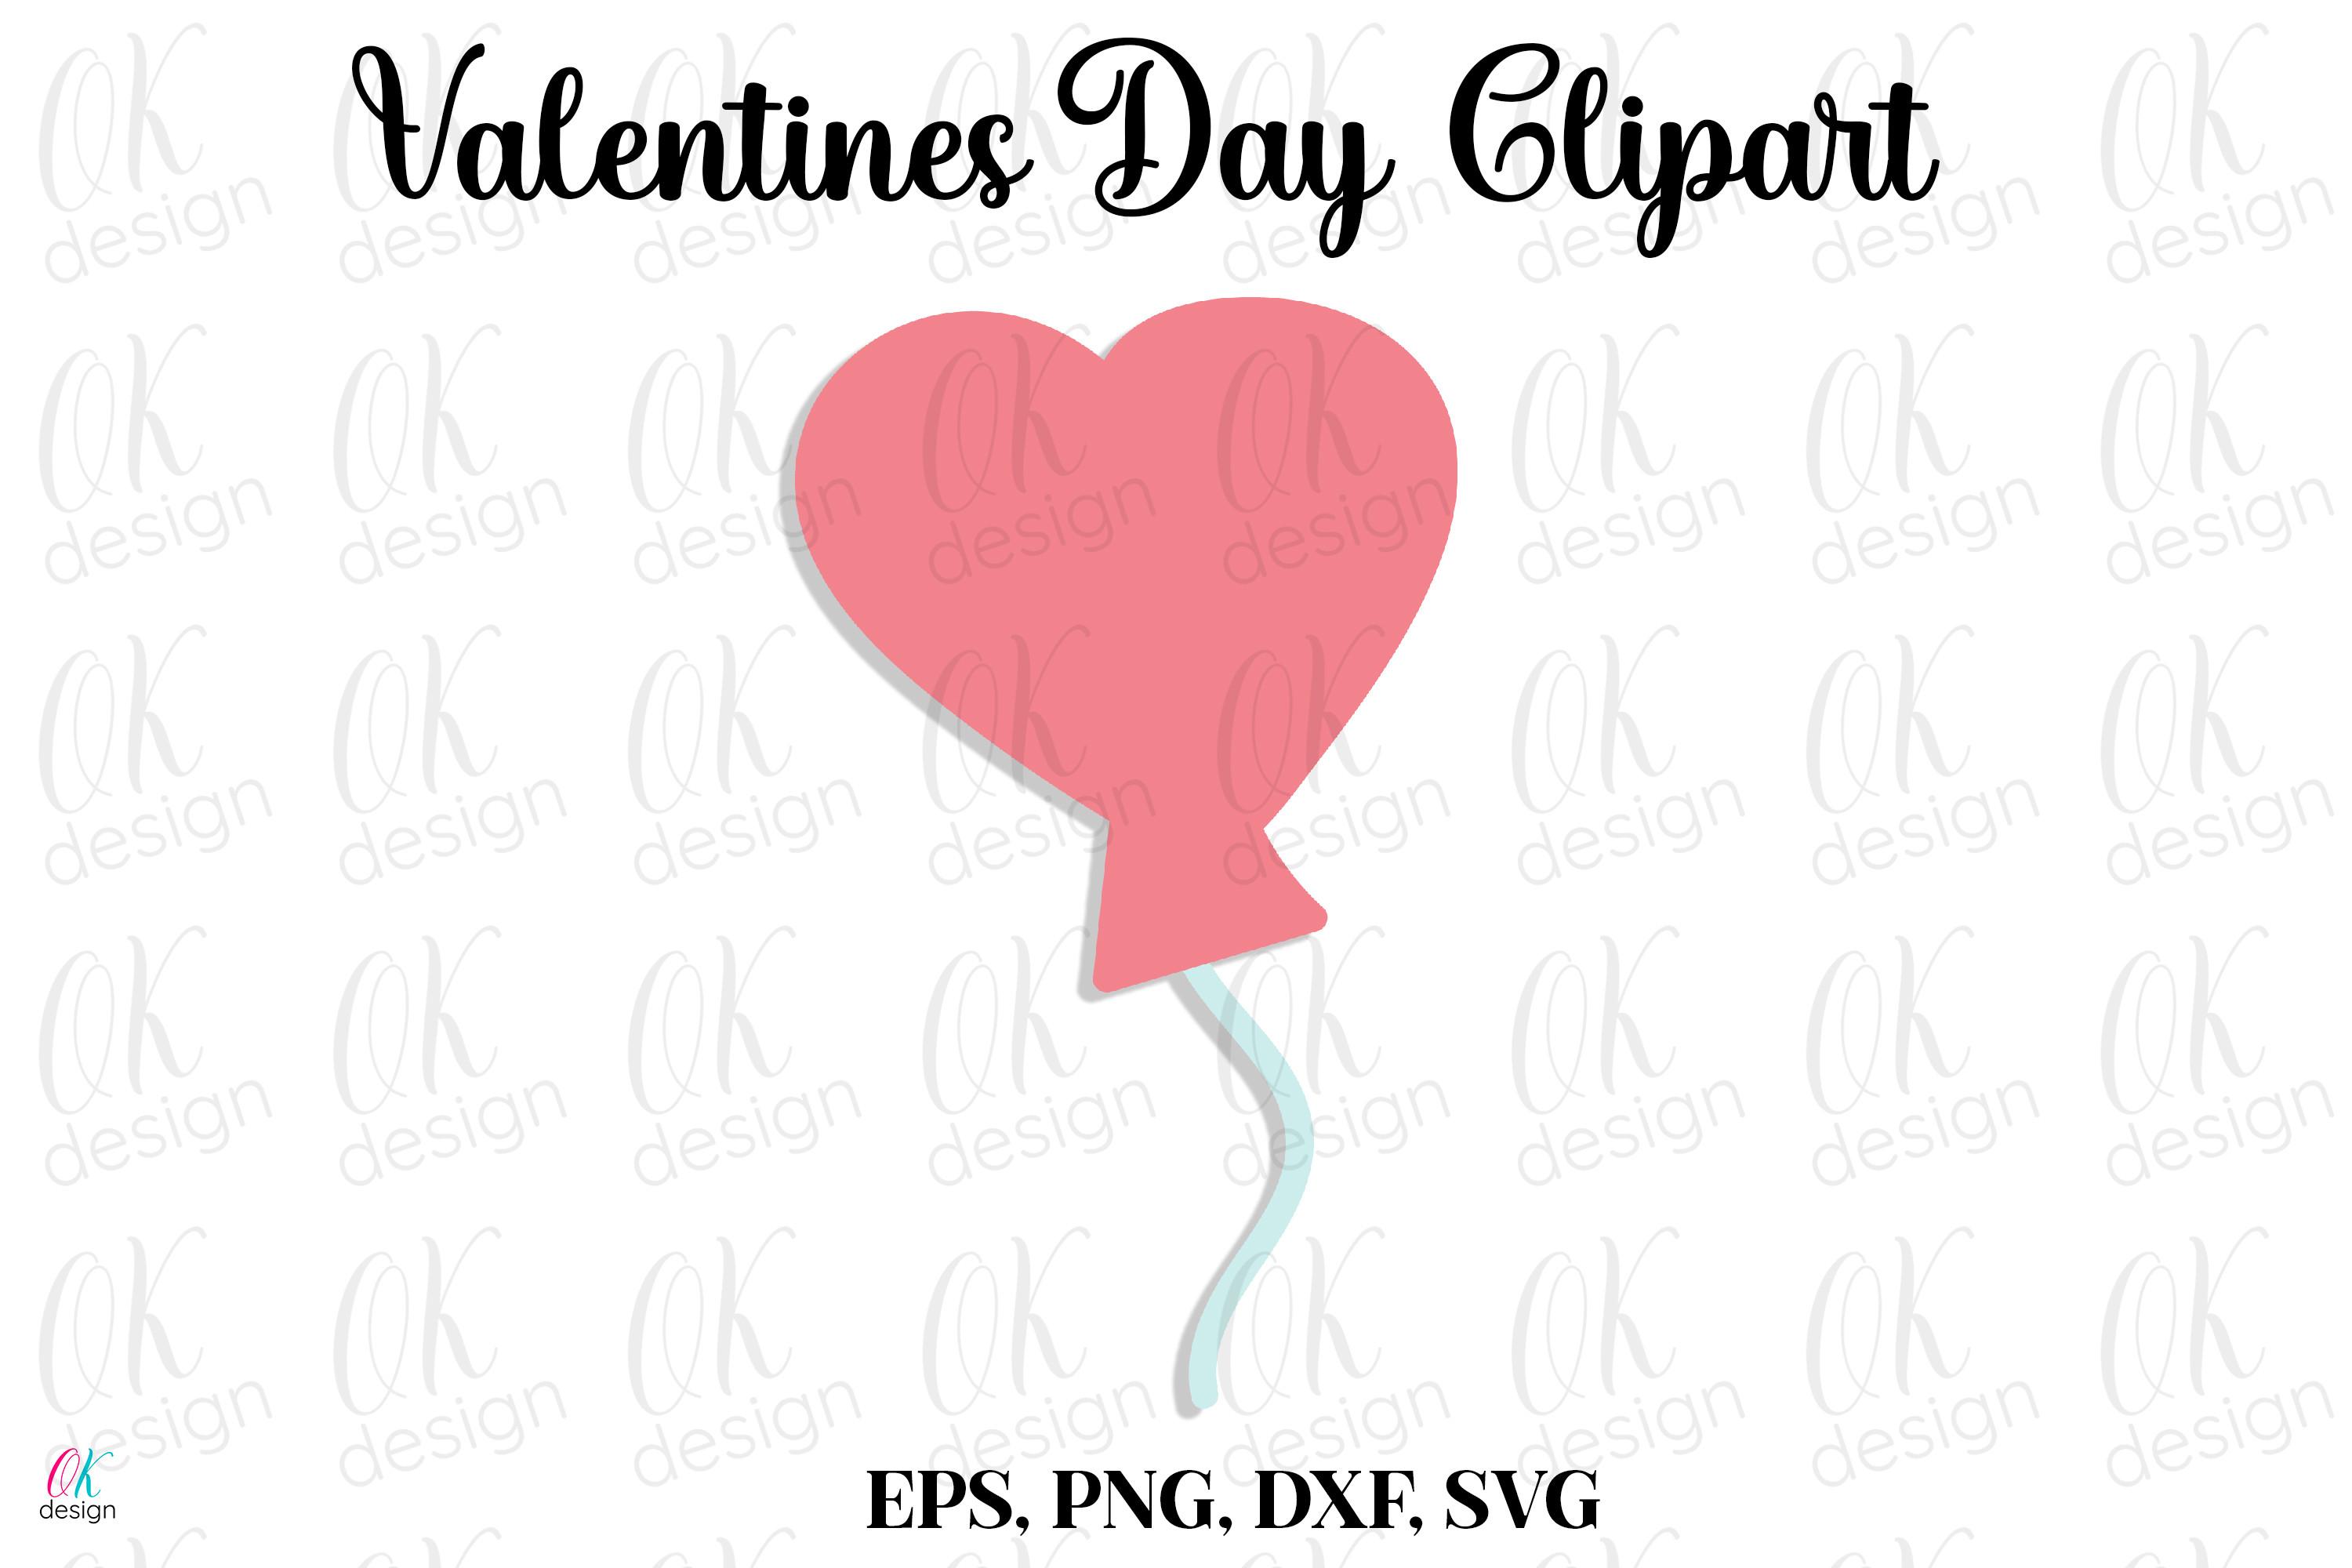 Valentines Clipart SVG, DXF, PNG Files.